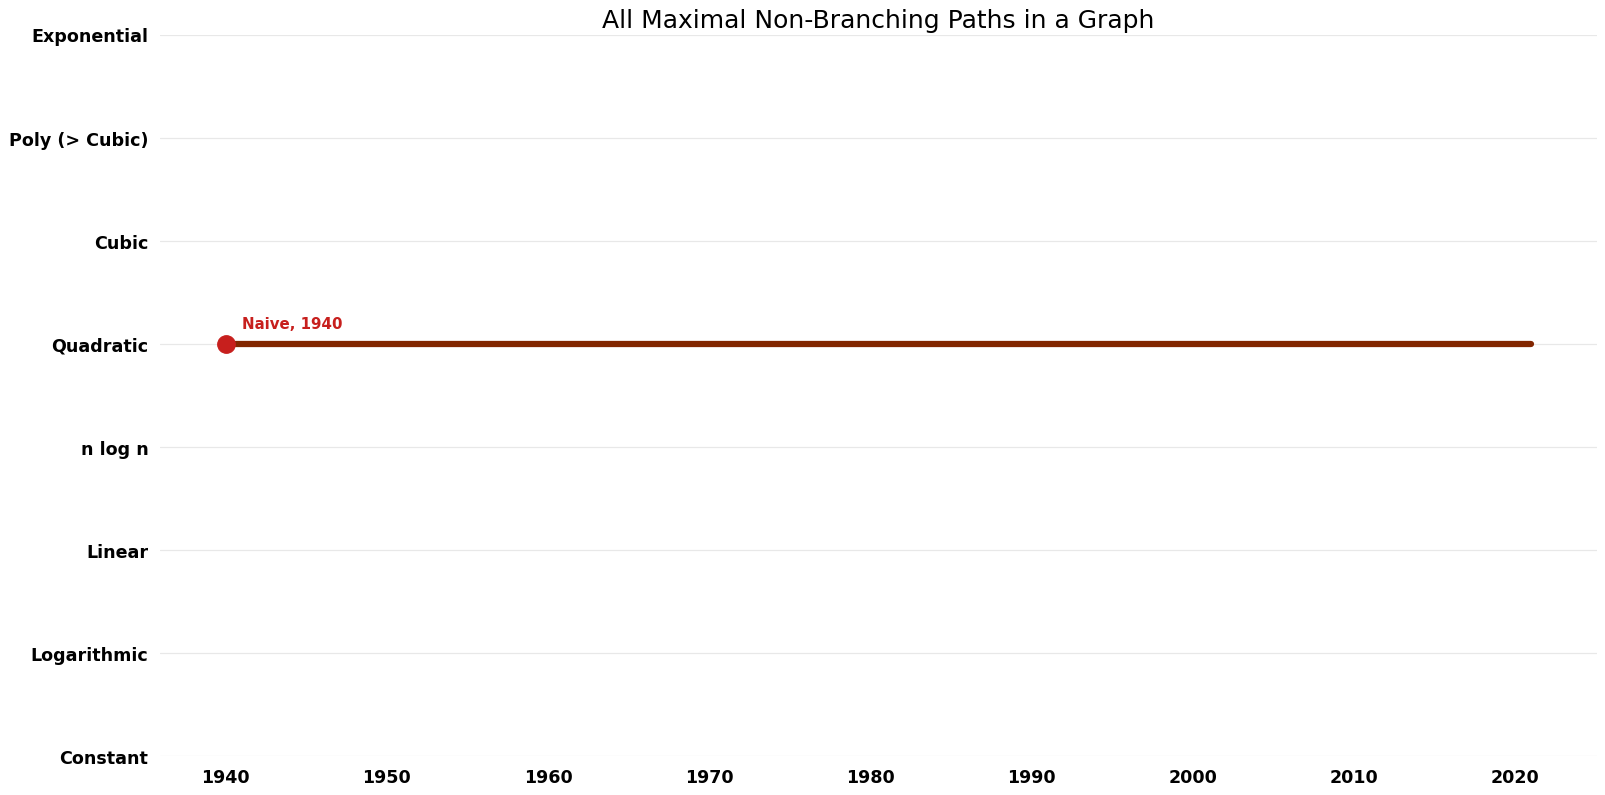 All Maximal Non-Branching Paths in a Graph - Time.png